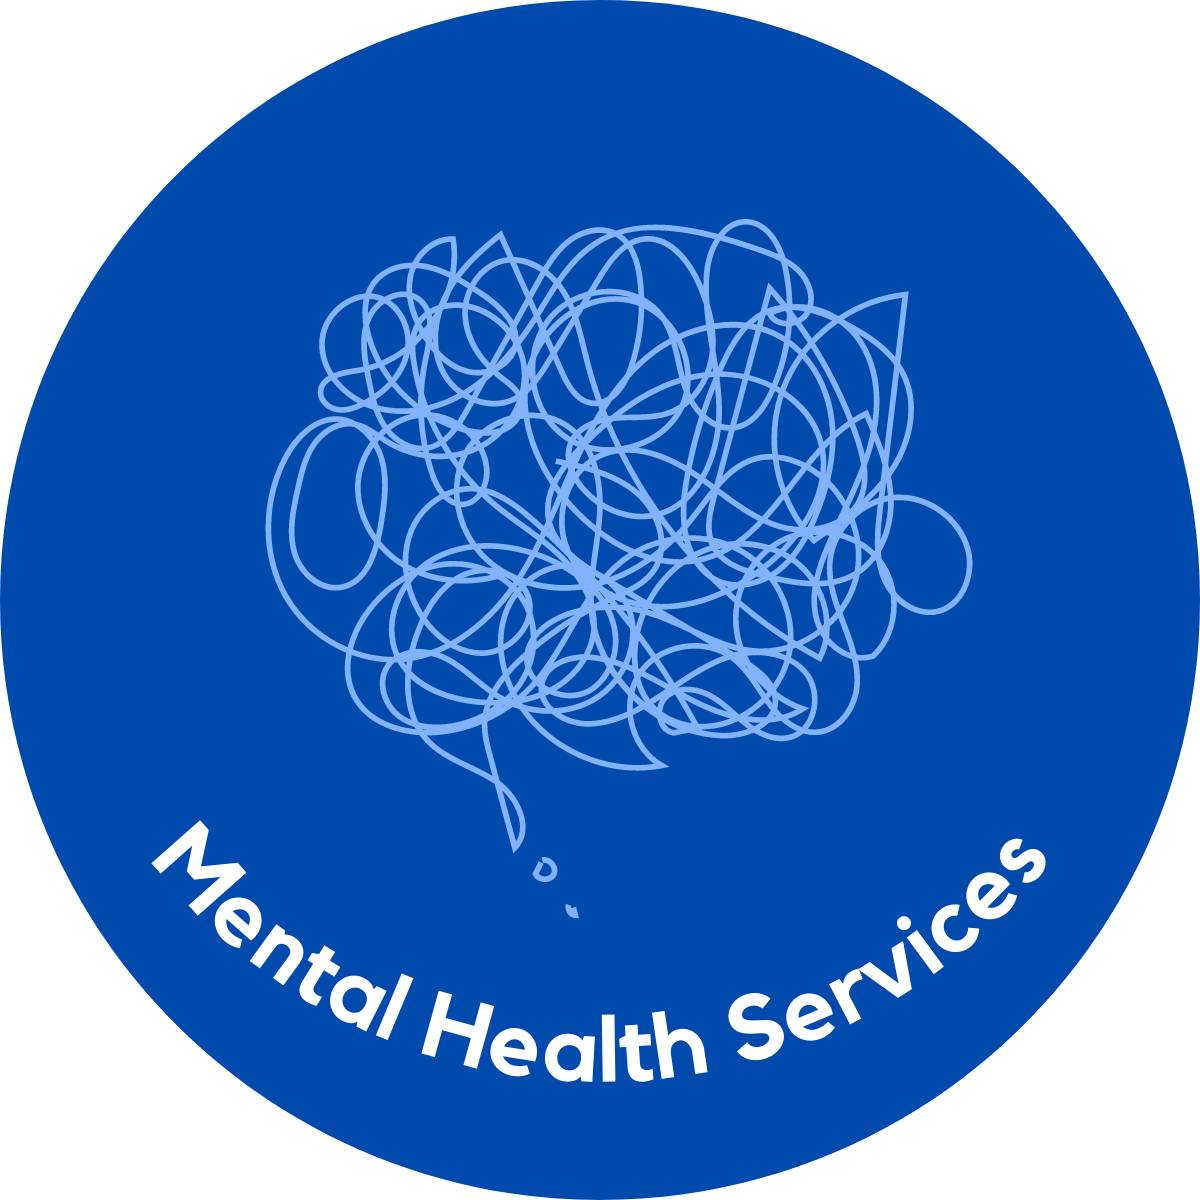 Mental health services